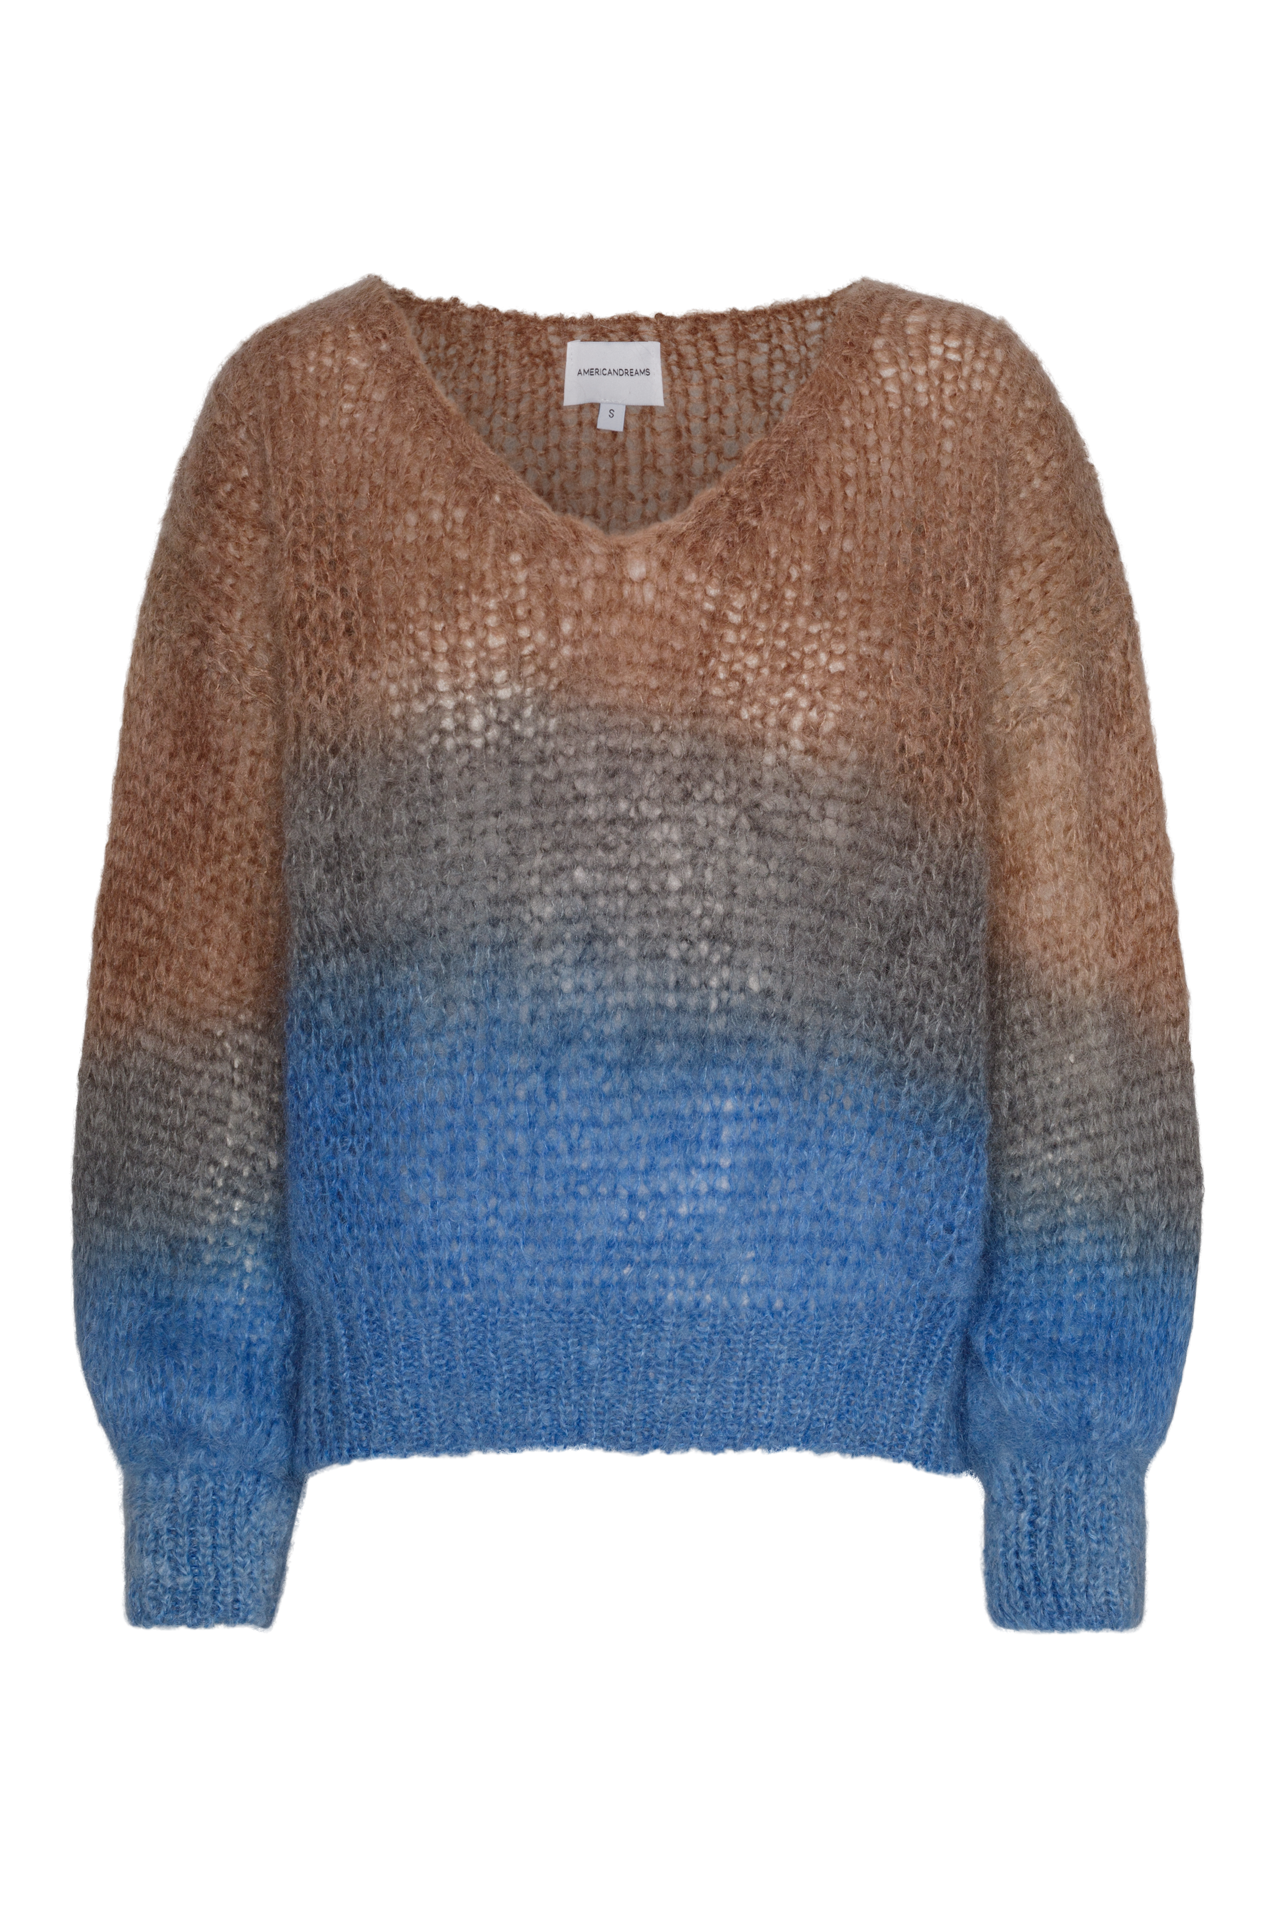 Milana LS Mohair Knit Ombre Blue/Brown